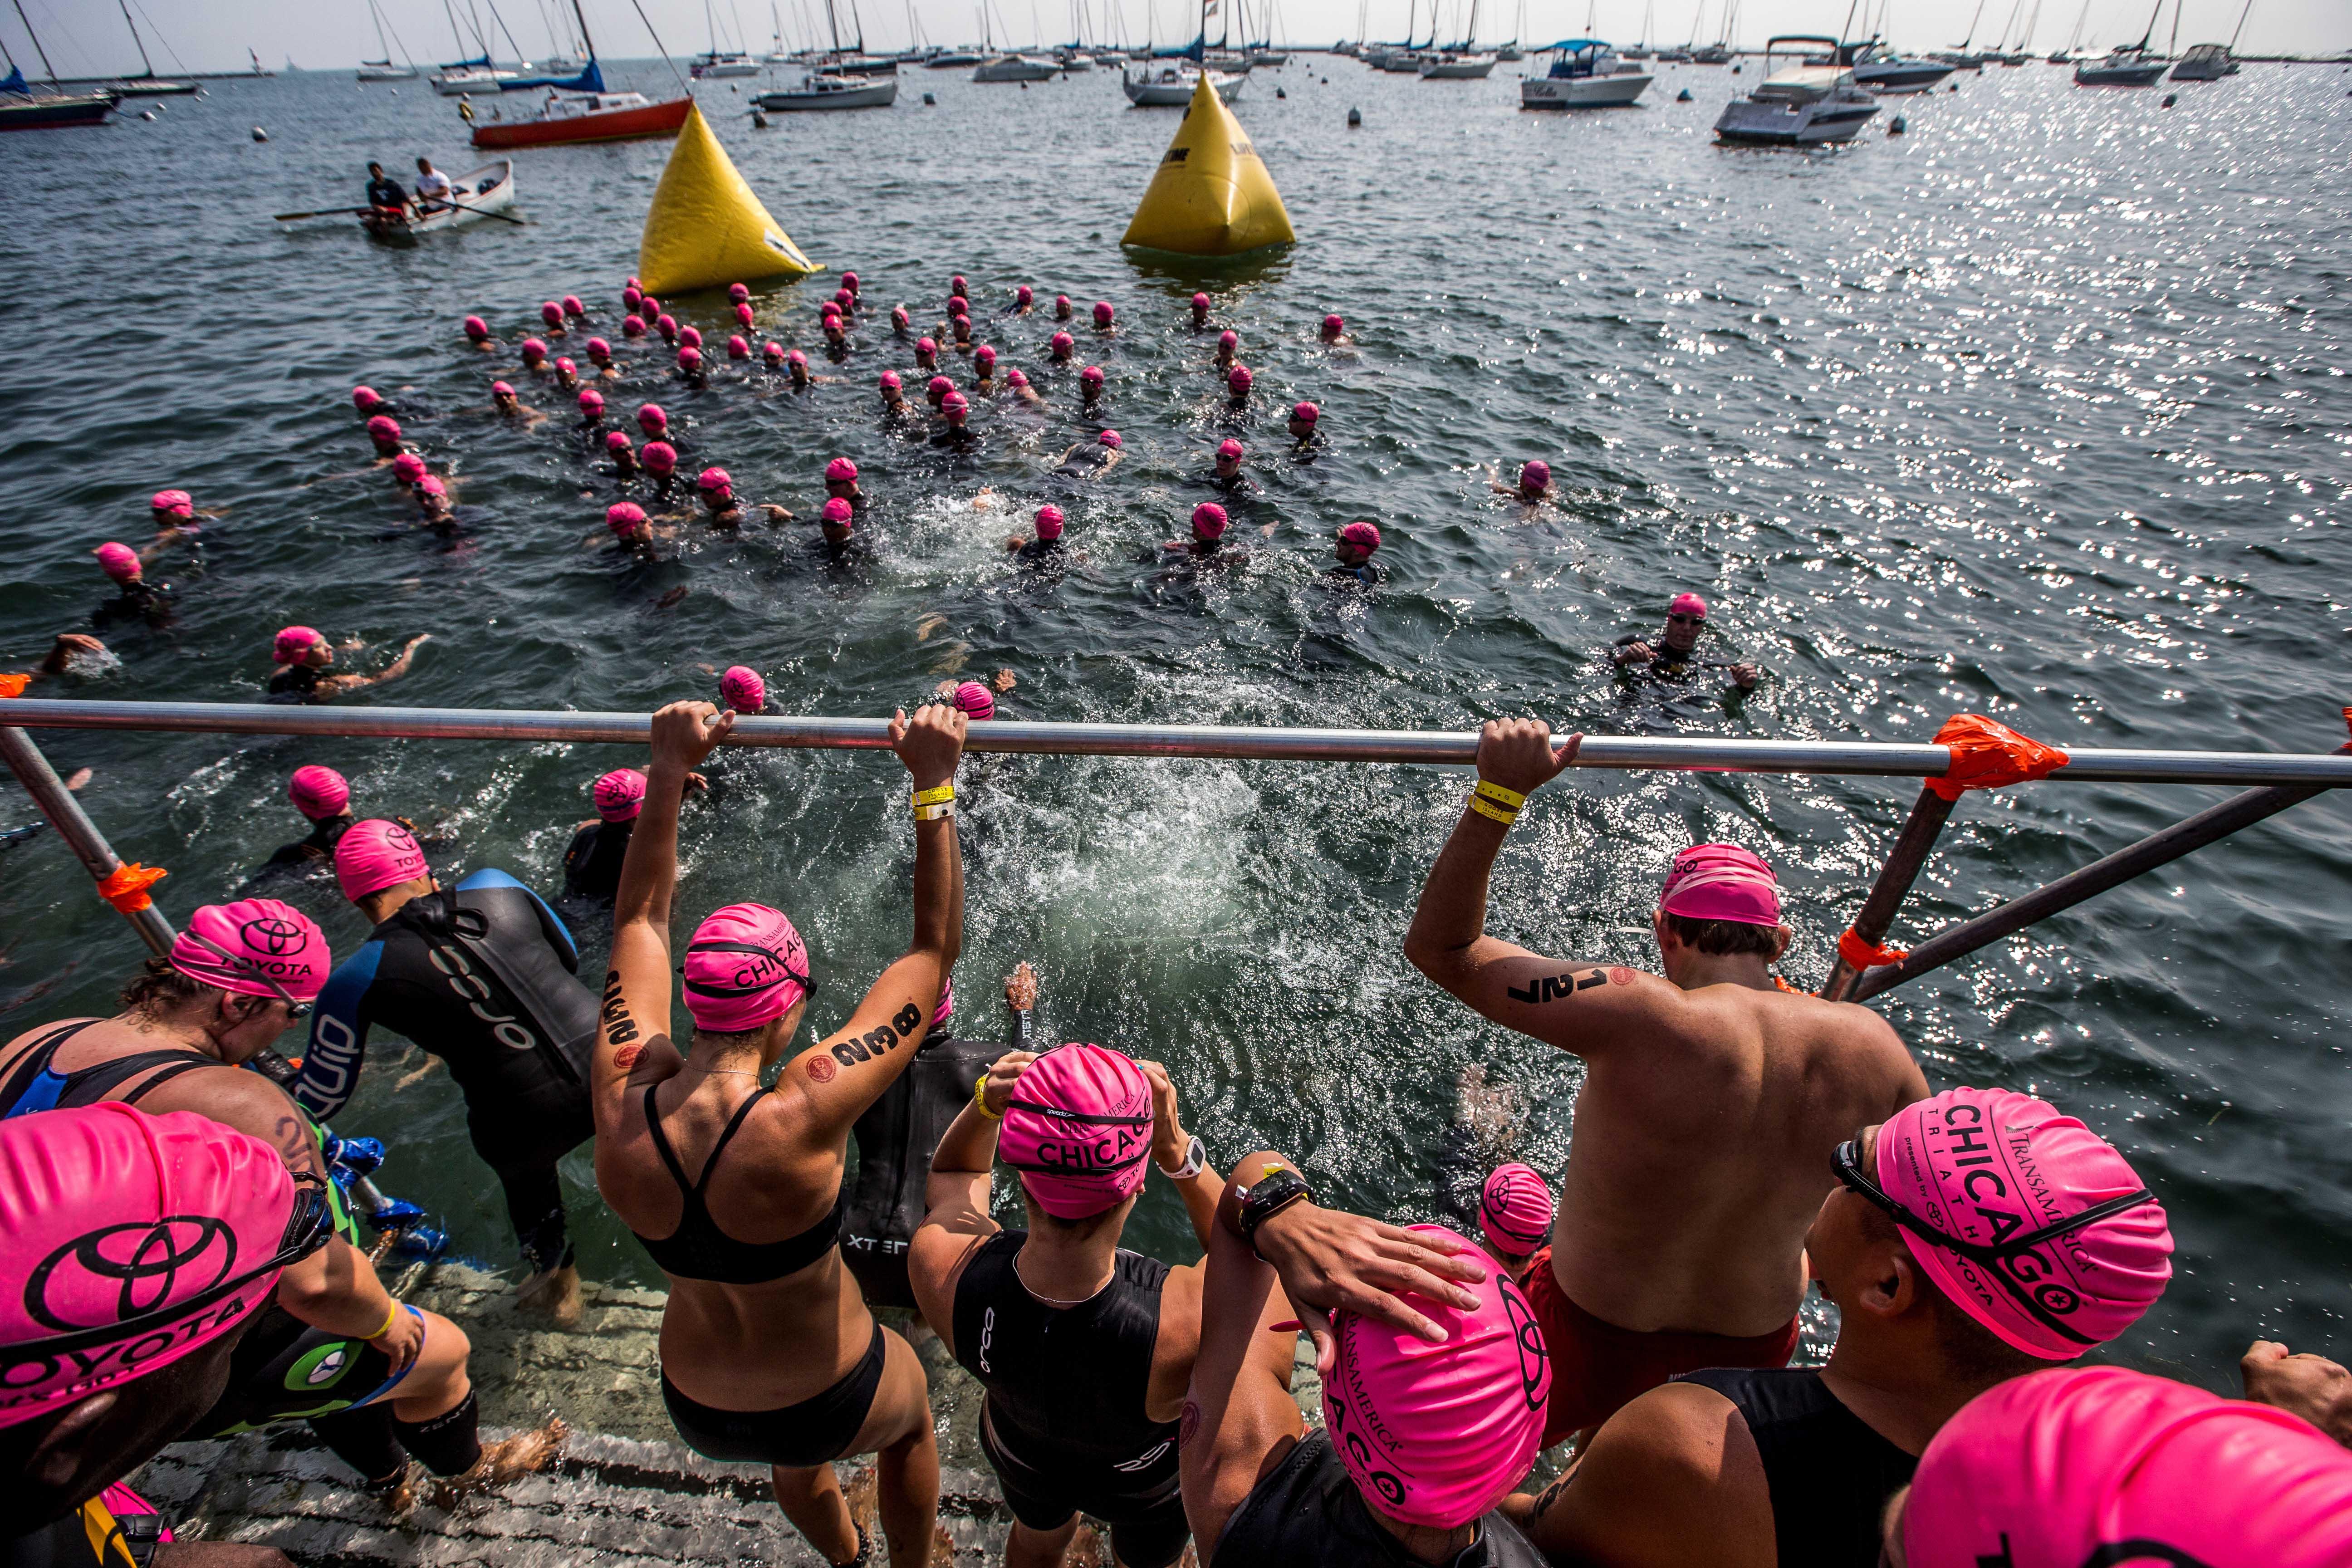 A wave of swimmers start their race in Lake Michigan at the 2015 Chicago Triathlon. (Courtesy of Transamerica Chicago Triathlon)